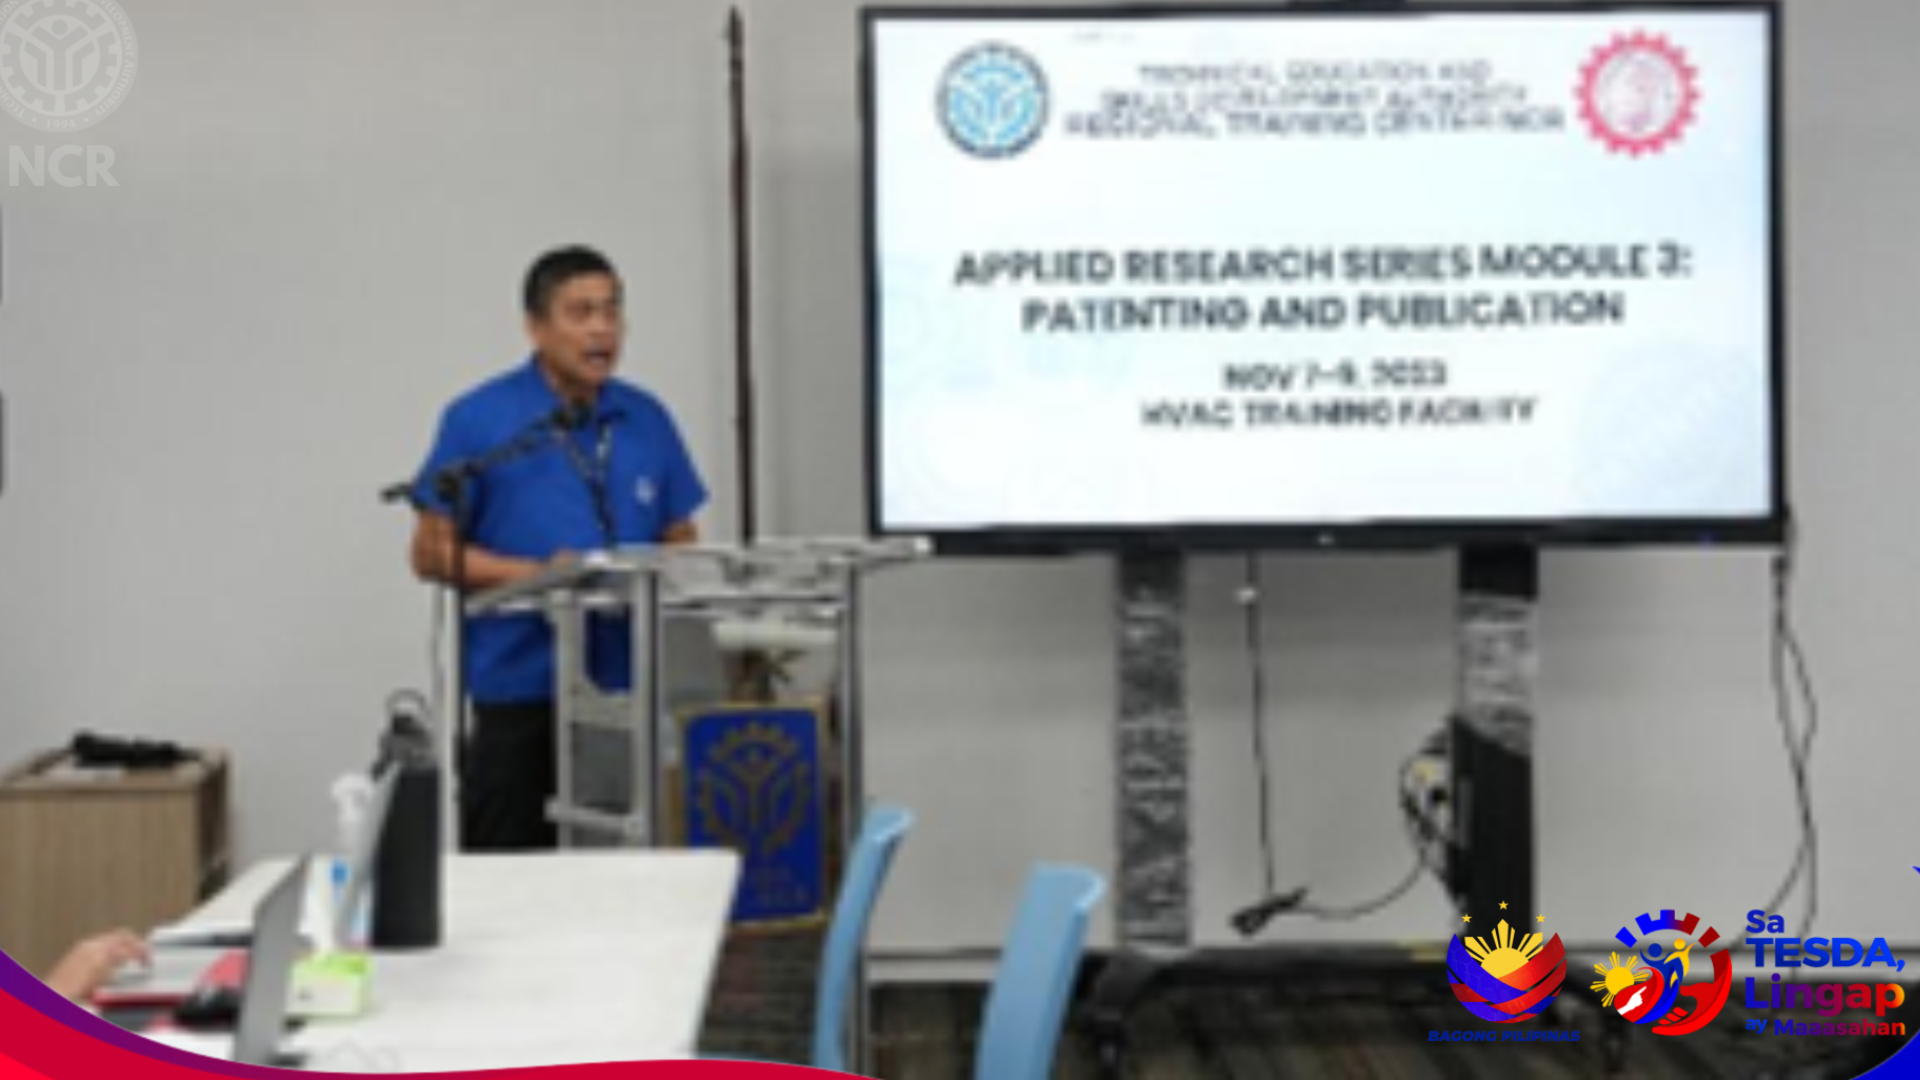 Advancing Expertise in Technical Writing and Research at the Applied Research Series Module 3 on Patenting and Publication